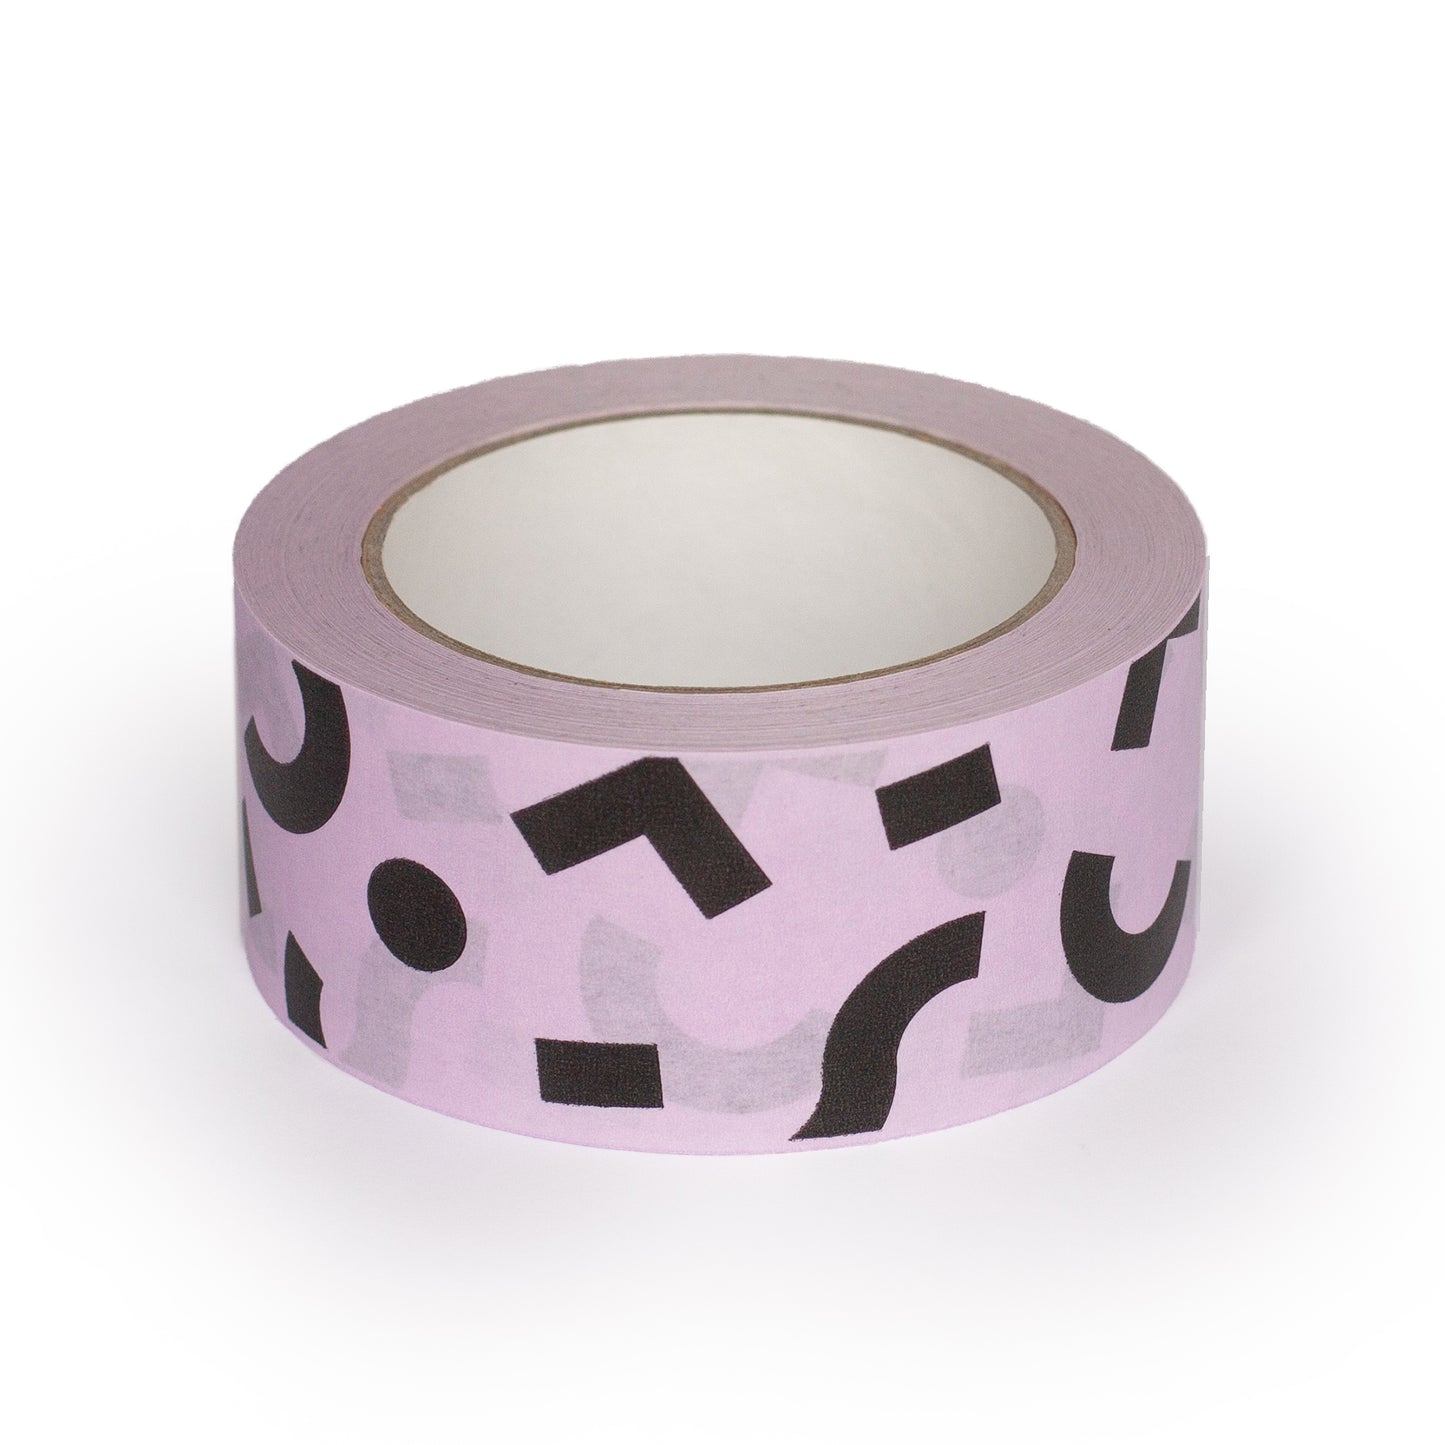 Decorative paper tapes, Shapes on Mauve print, 50 metres length, 48mm width